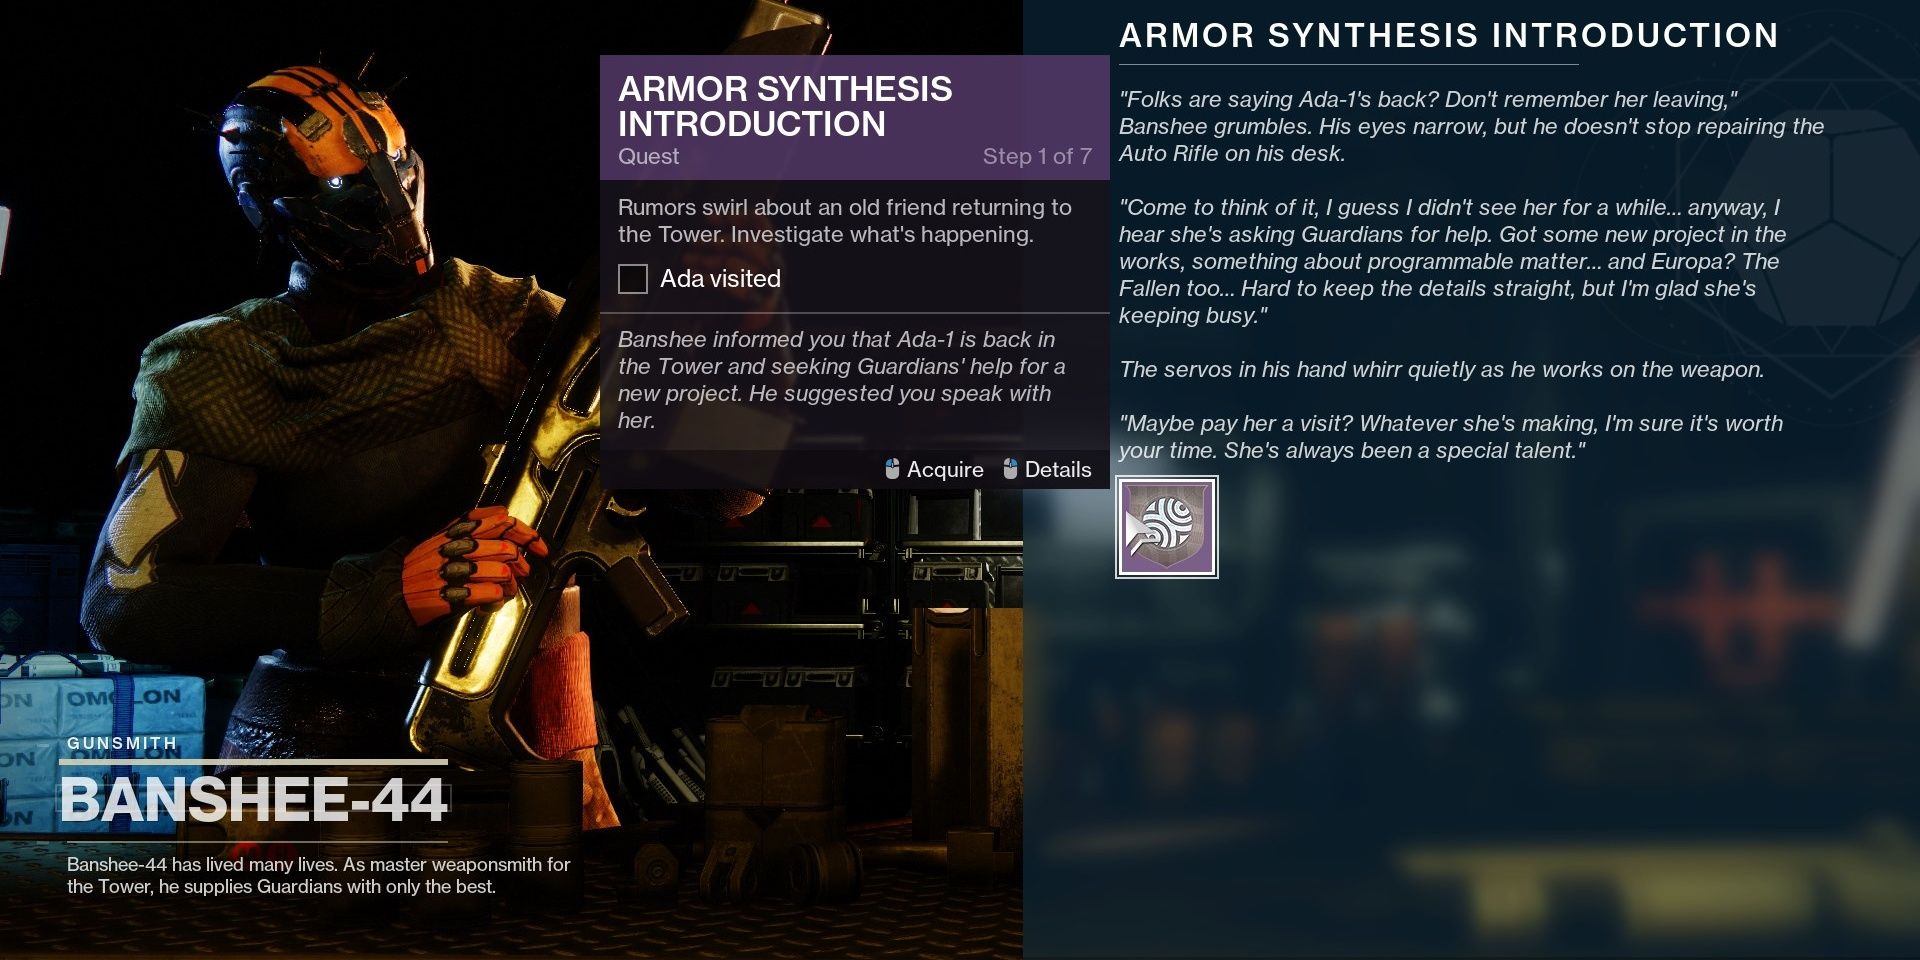 Destiny 2 Banshee-44 Armor Synthesis Introduction